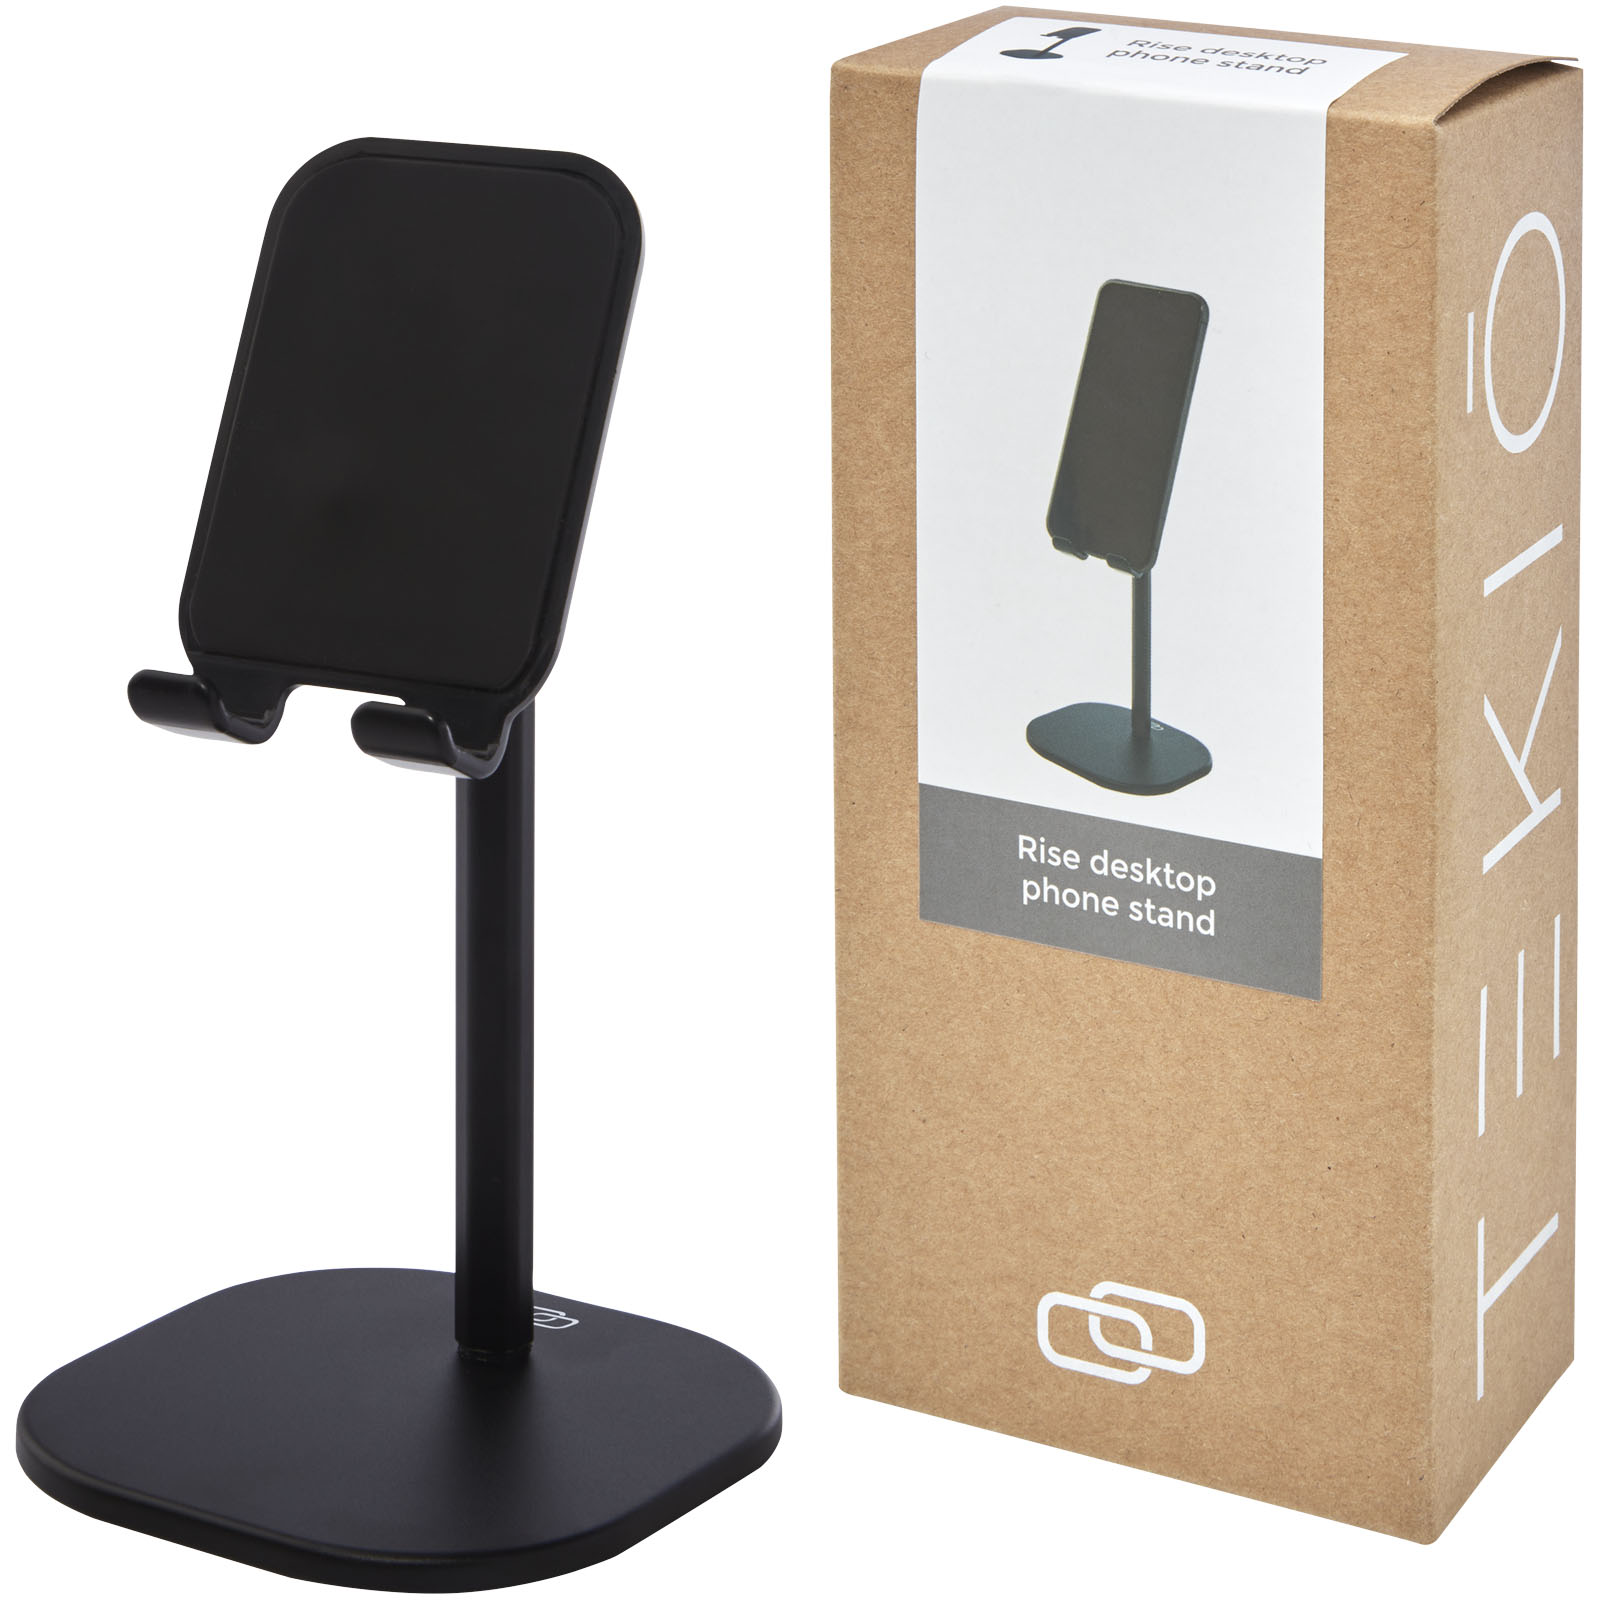 Advertising Stands & Holders - Rise phone/tablet stand - 5